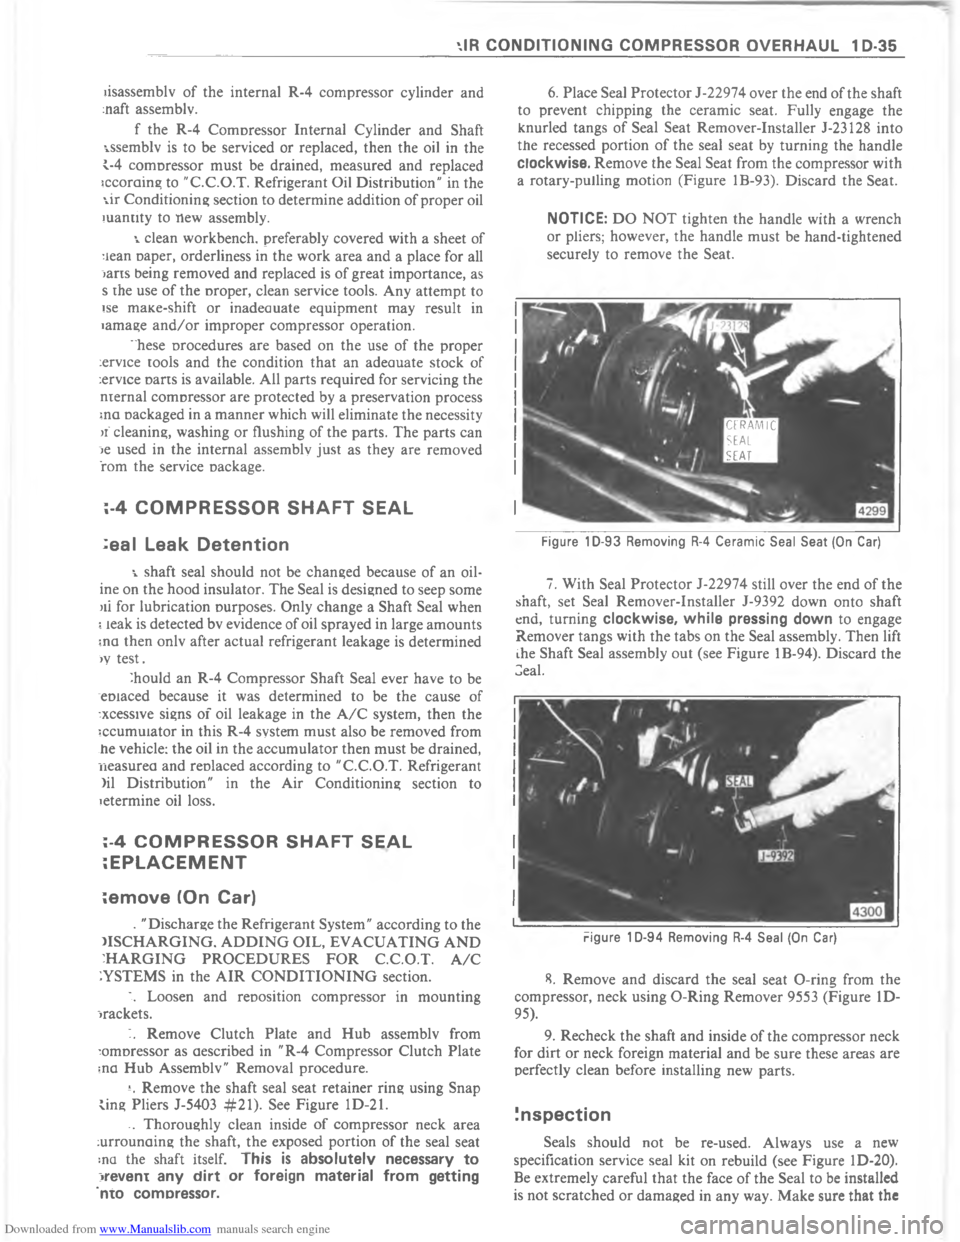 CHEVROLET MALIBU 1980 4.G Service Manual Downloaded from www.Manualslib.com manuals search engine  	    @ 	           	    ) 5>           	   


&
